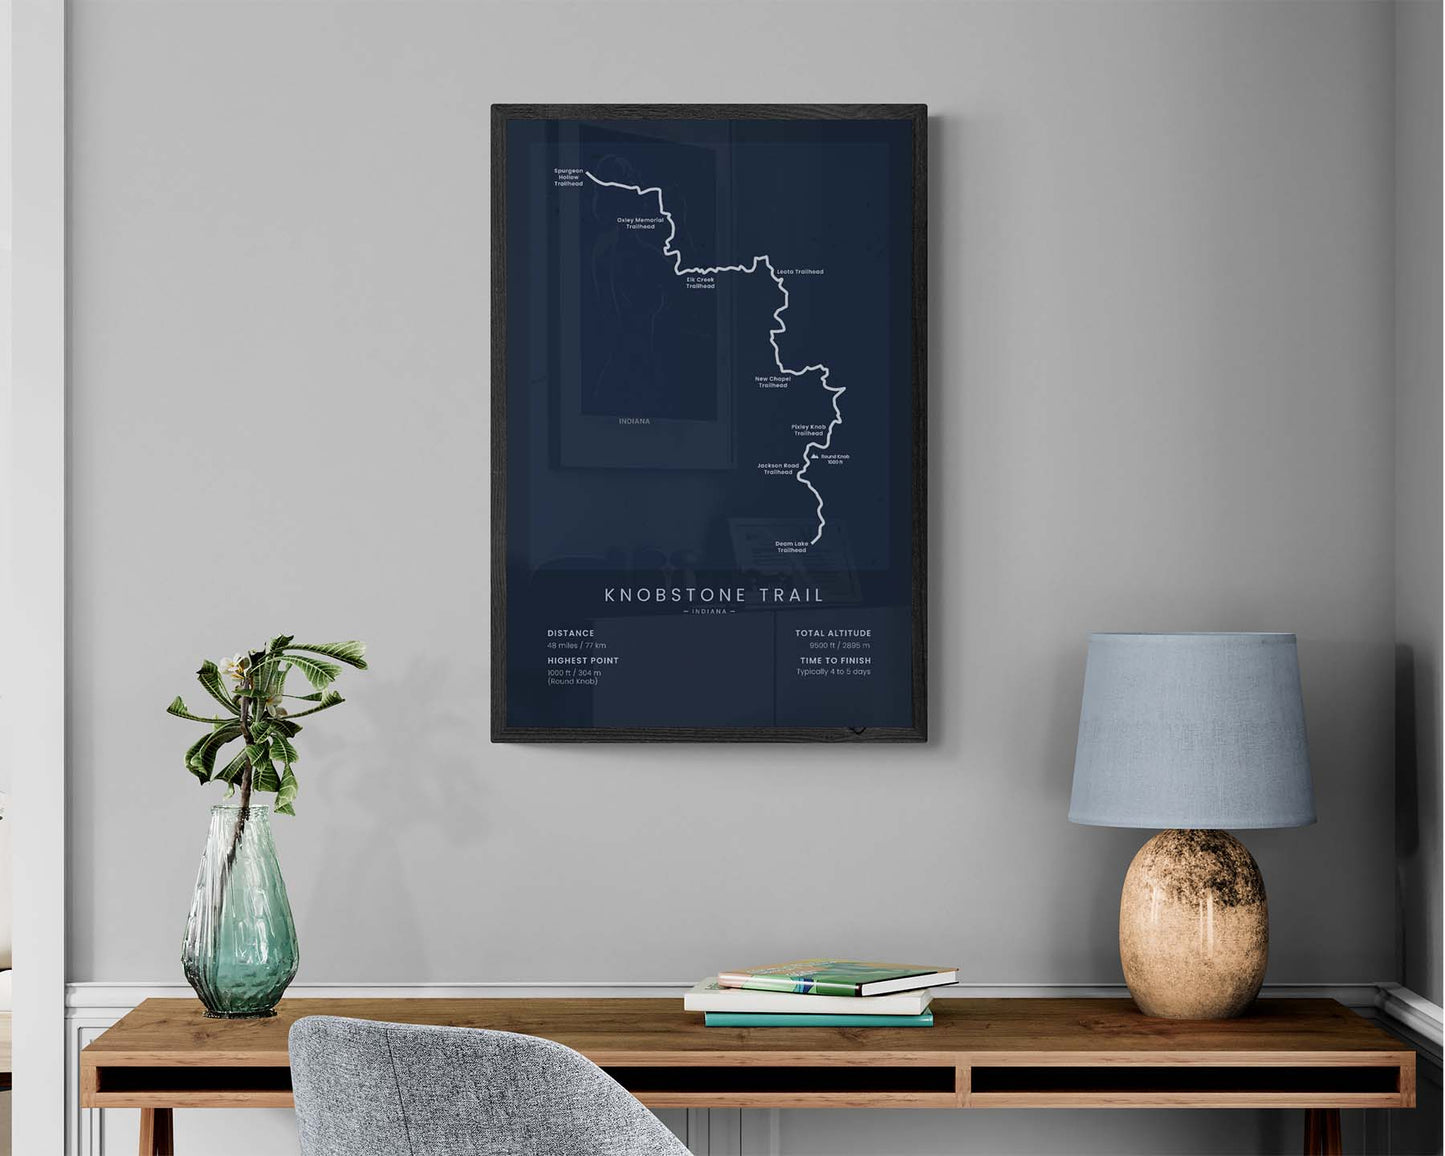 Knobstone Trail (Indiana) Hike Wall Map in Minimal Interior Decor